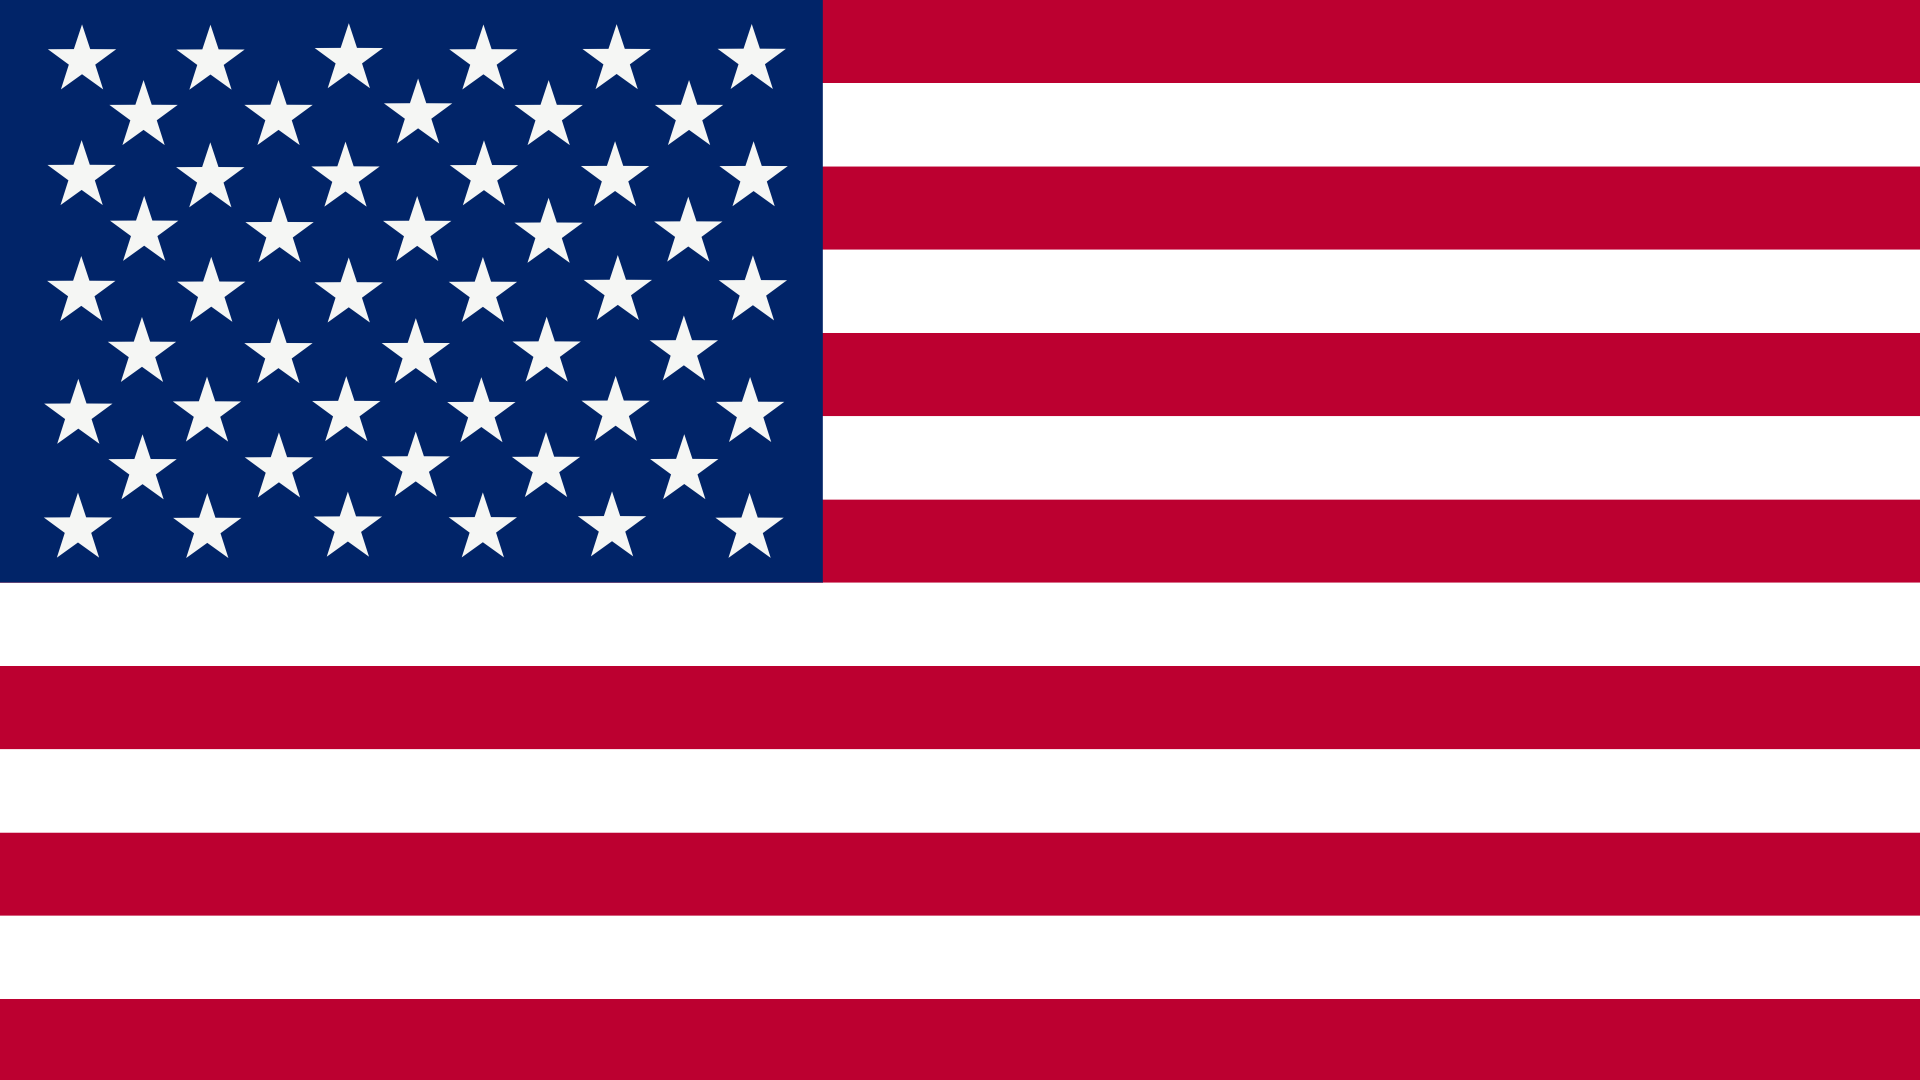 Animated illustration of the American flag with the stars shaking in fear. 